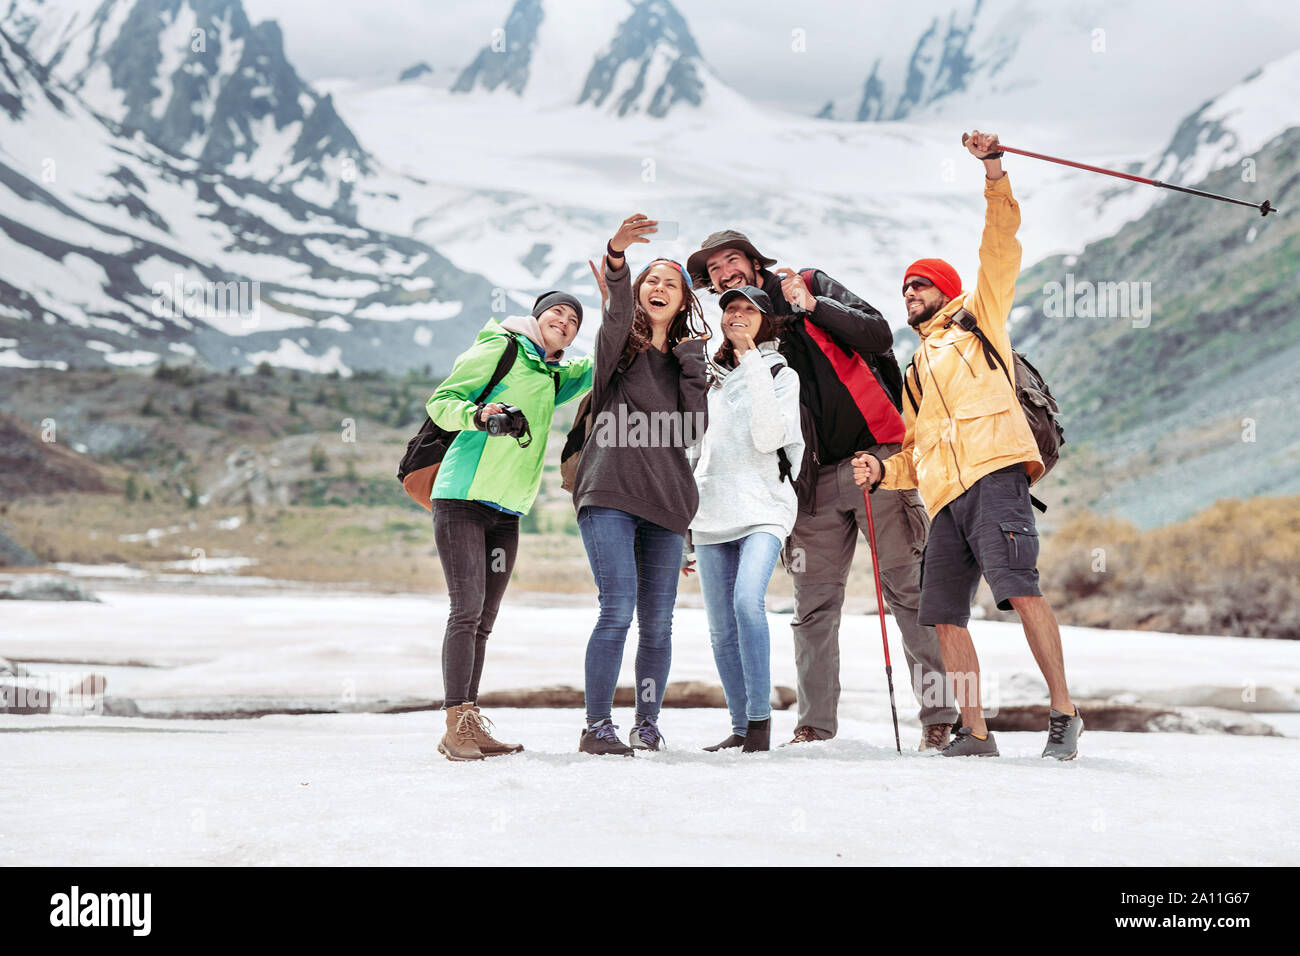 Group of five happy tourists is taking selfie photo against mountains Stock Photo